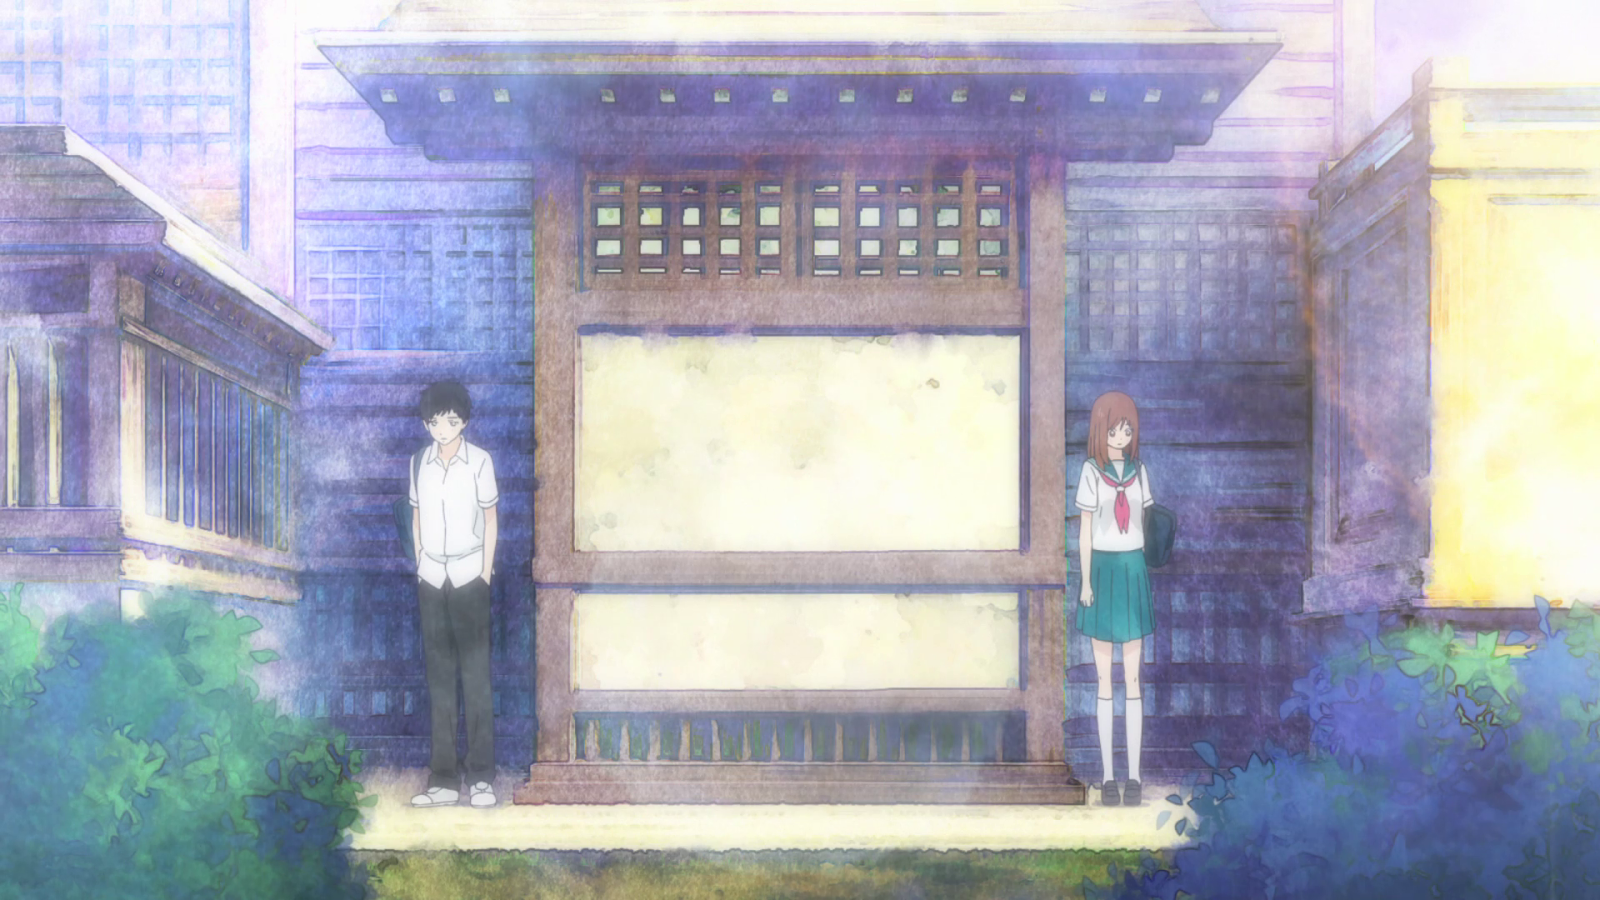 Ao Haru Ride Ep. 1: Do the right thing